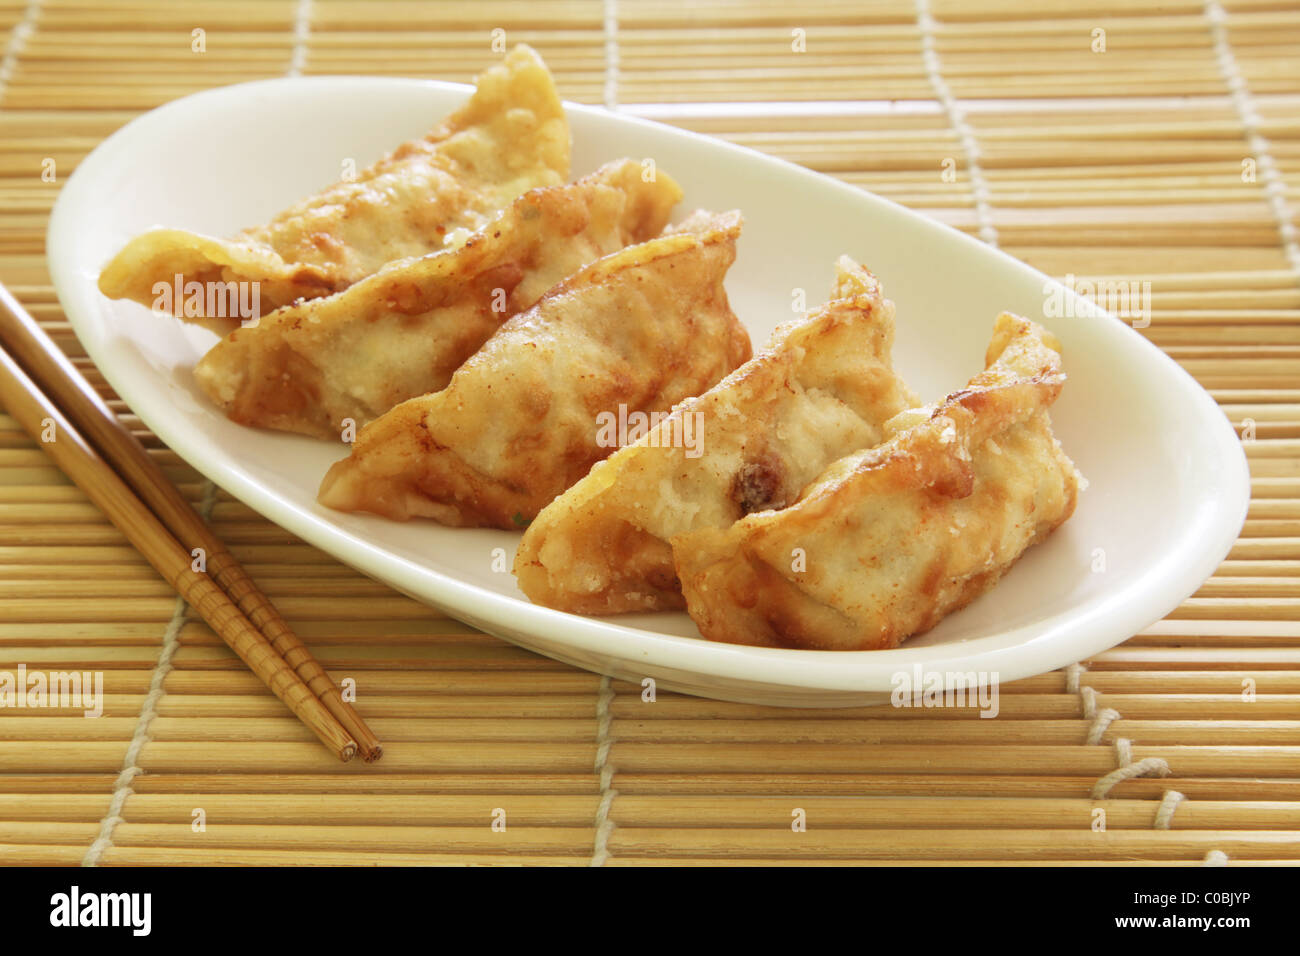 Fried Dumplings Chinese Style Cuisine as Meal Stock Photo